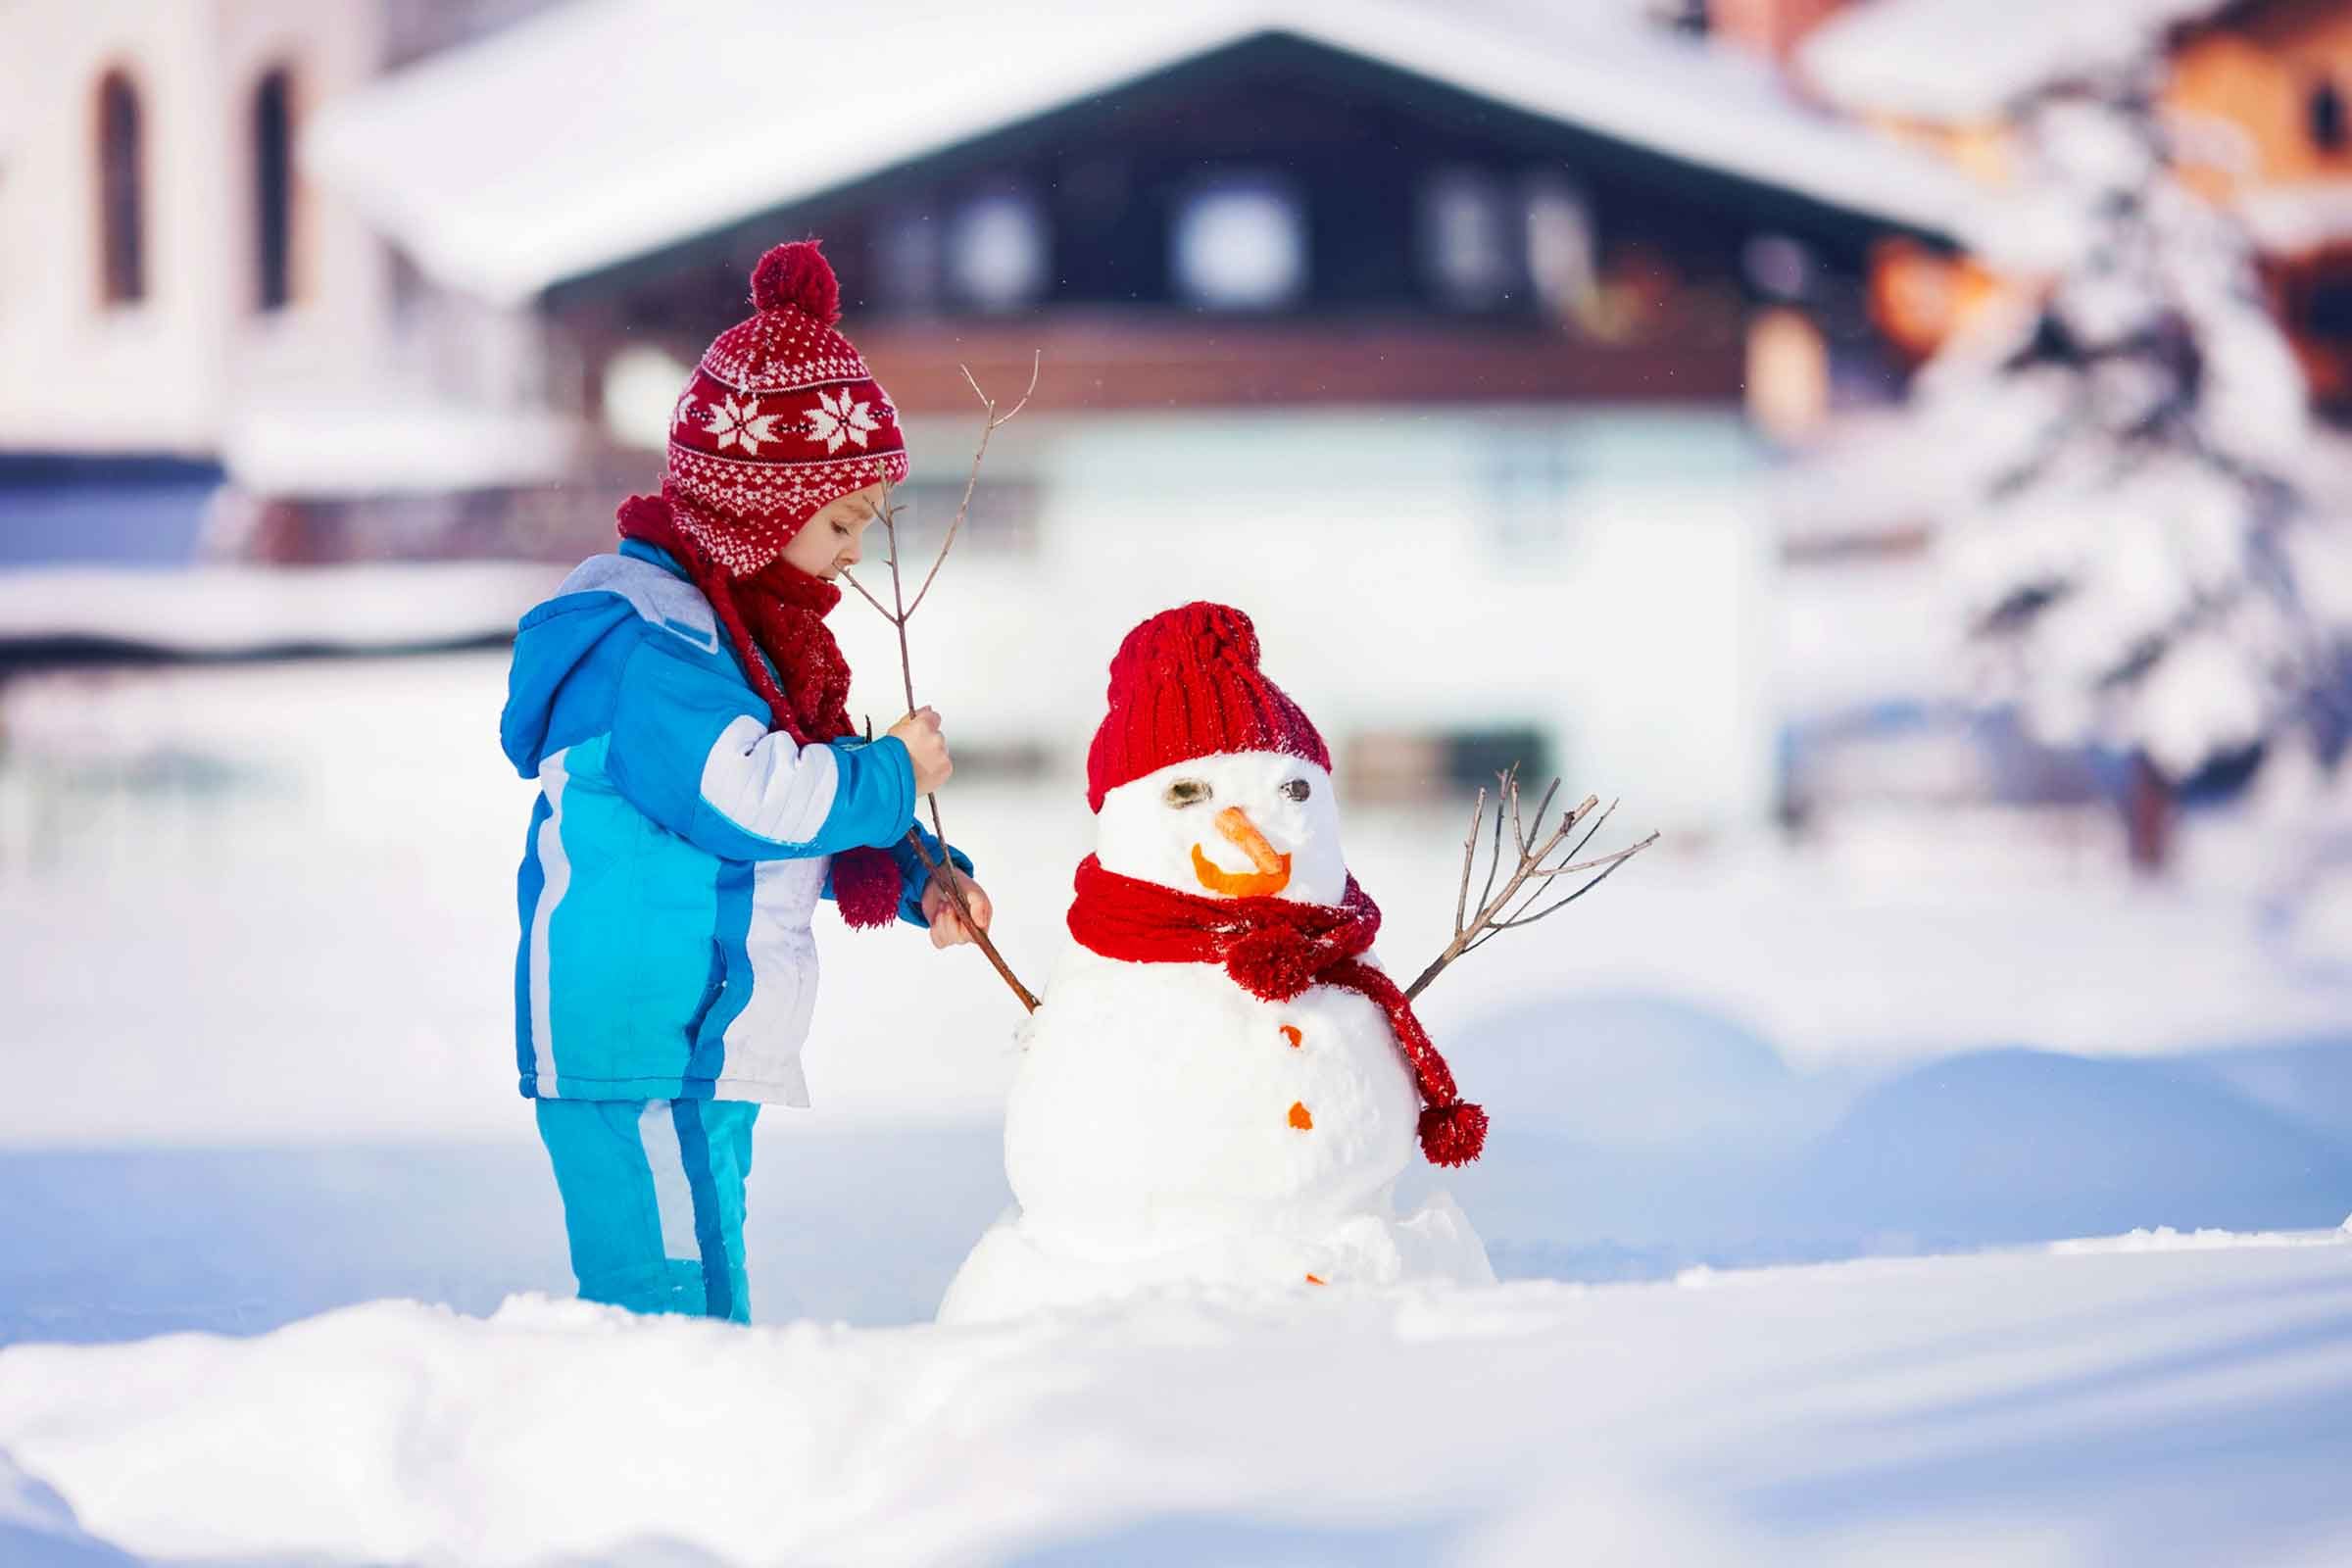 How to Build the Perfect Snowman: 6 Tips